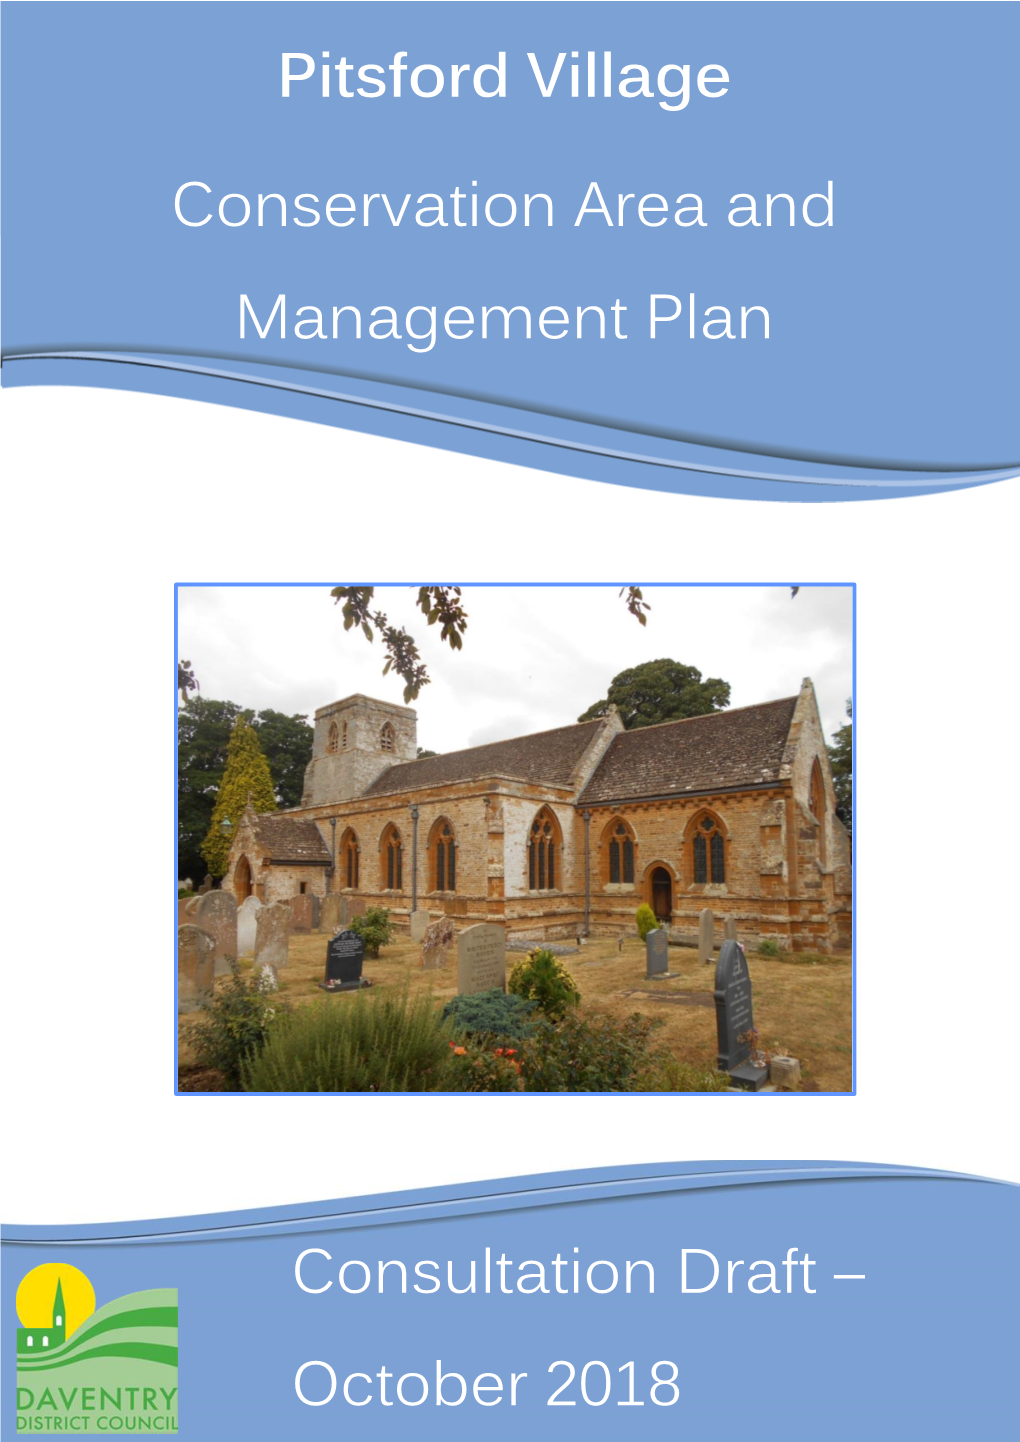 Pitsford Village Conservation Area and Management Plan Consultation Draft